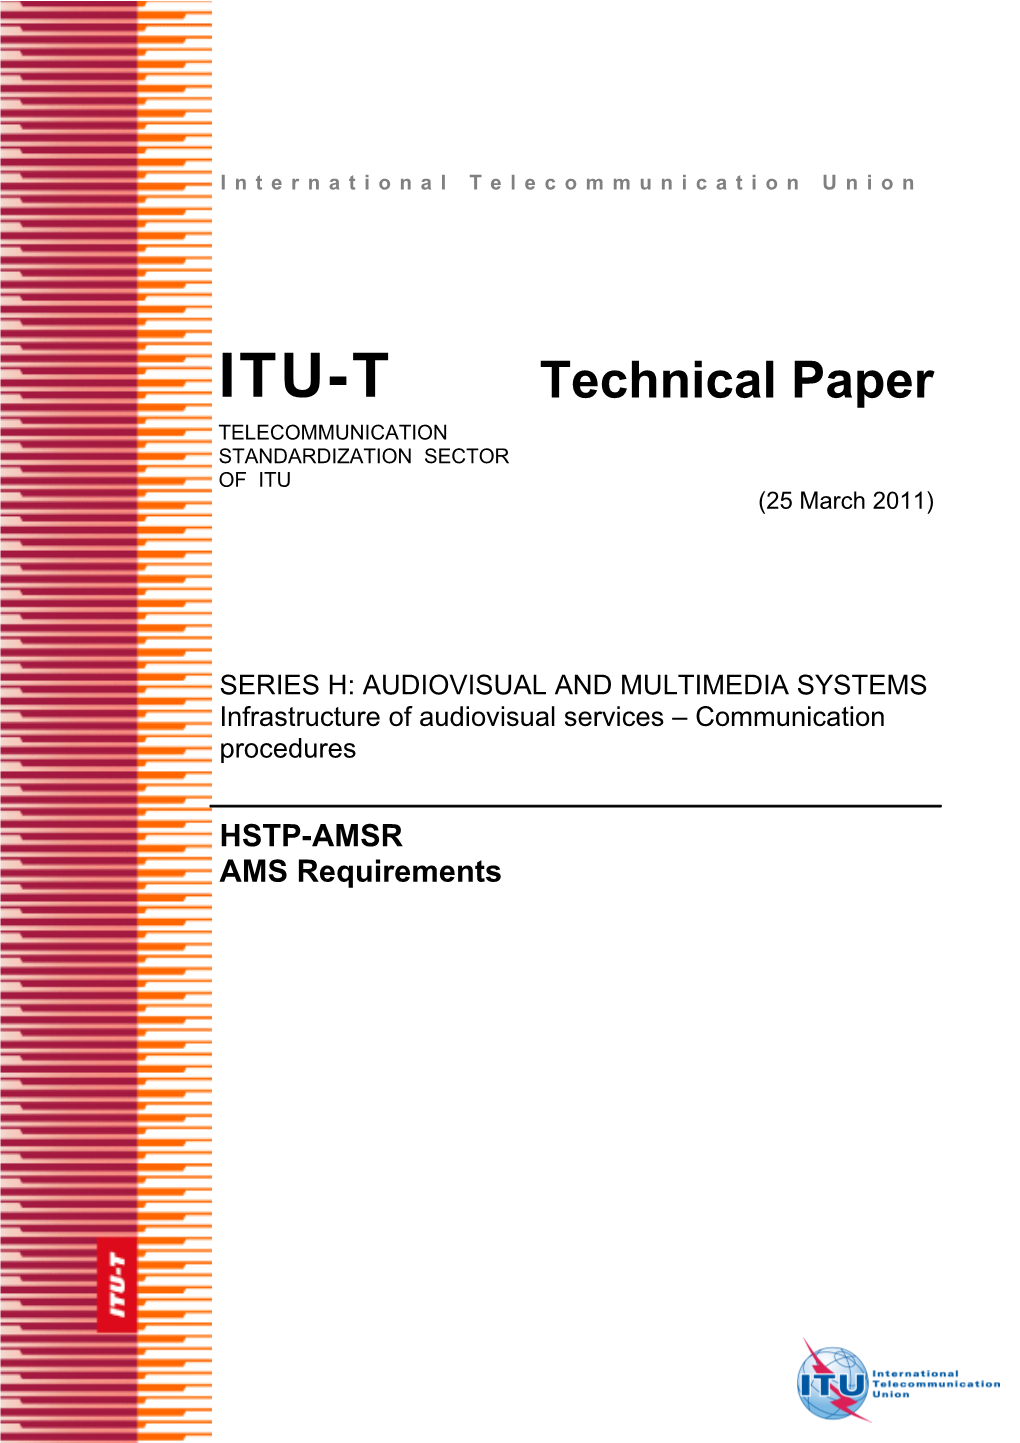 Approval: ITU-T HSTP-AMSR Technical Paper: AMS Requirements (New)